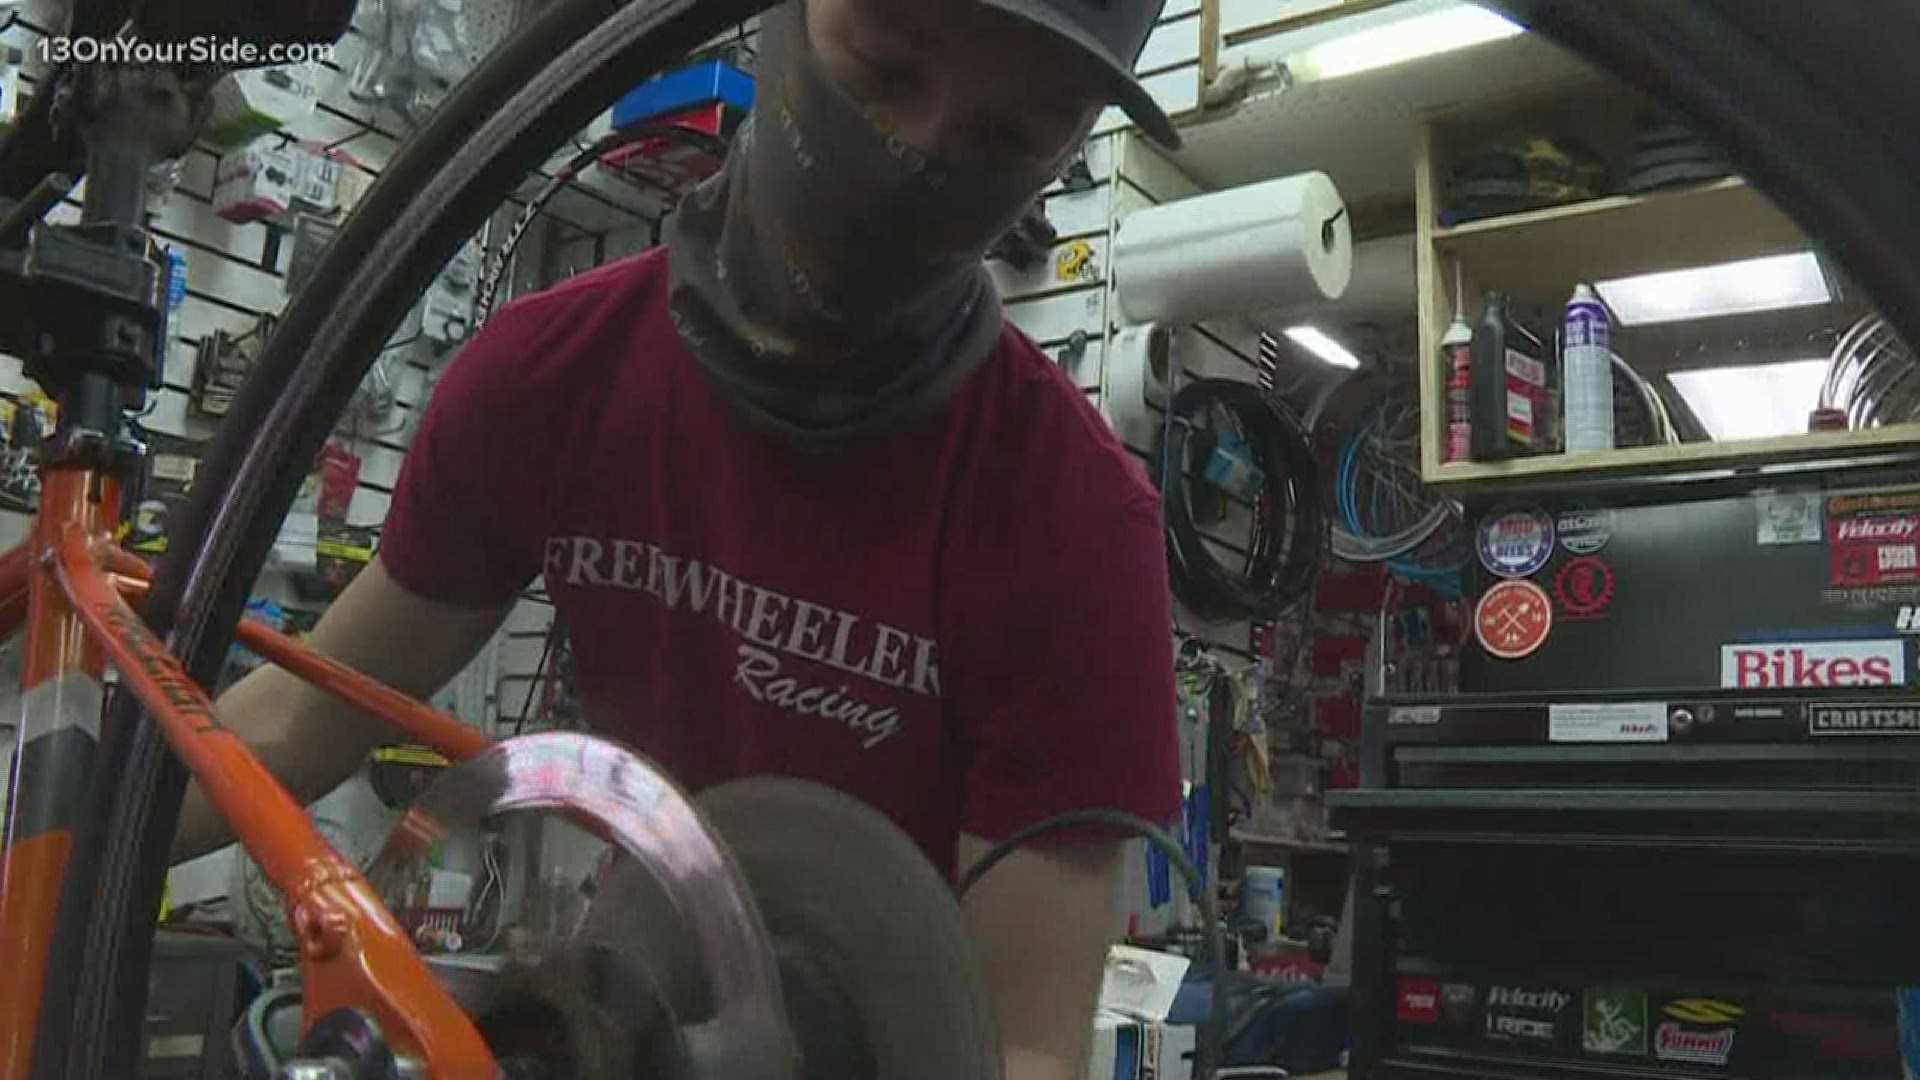 It's a big reopening day for many Michigan bike repair shops as they try to make up for sales missed amid their COVID-19 shut-down.